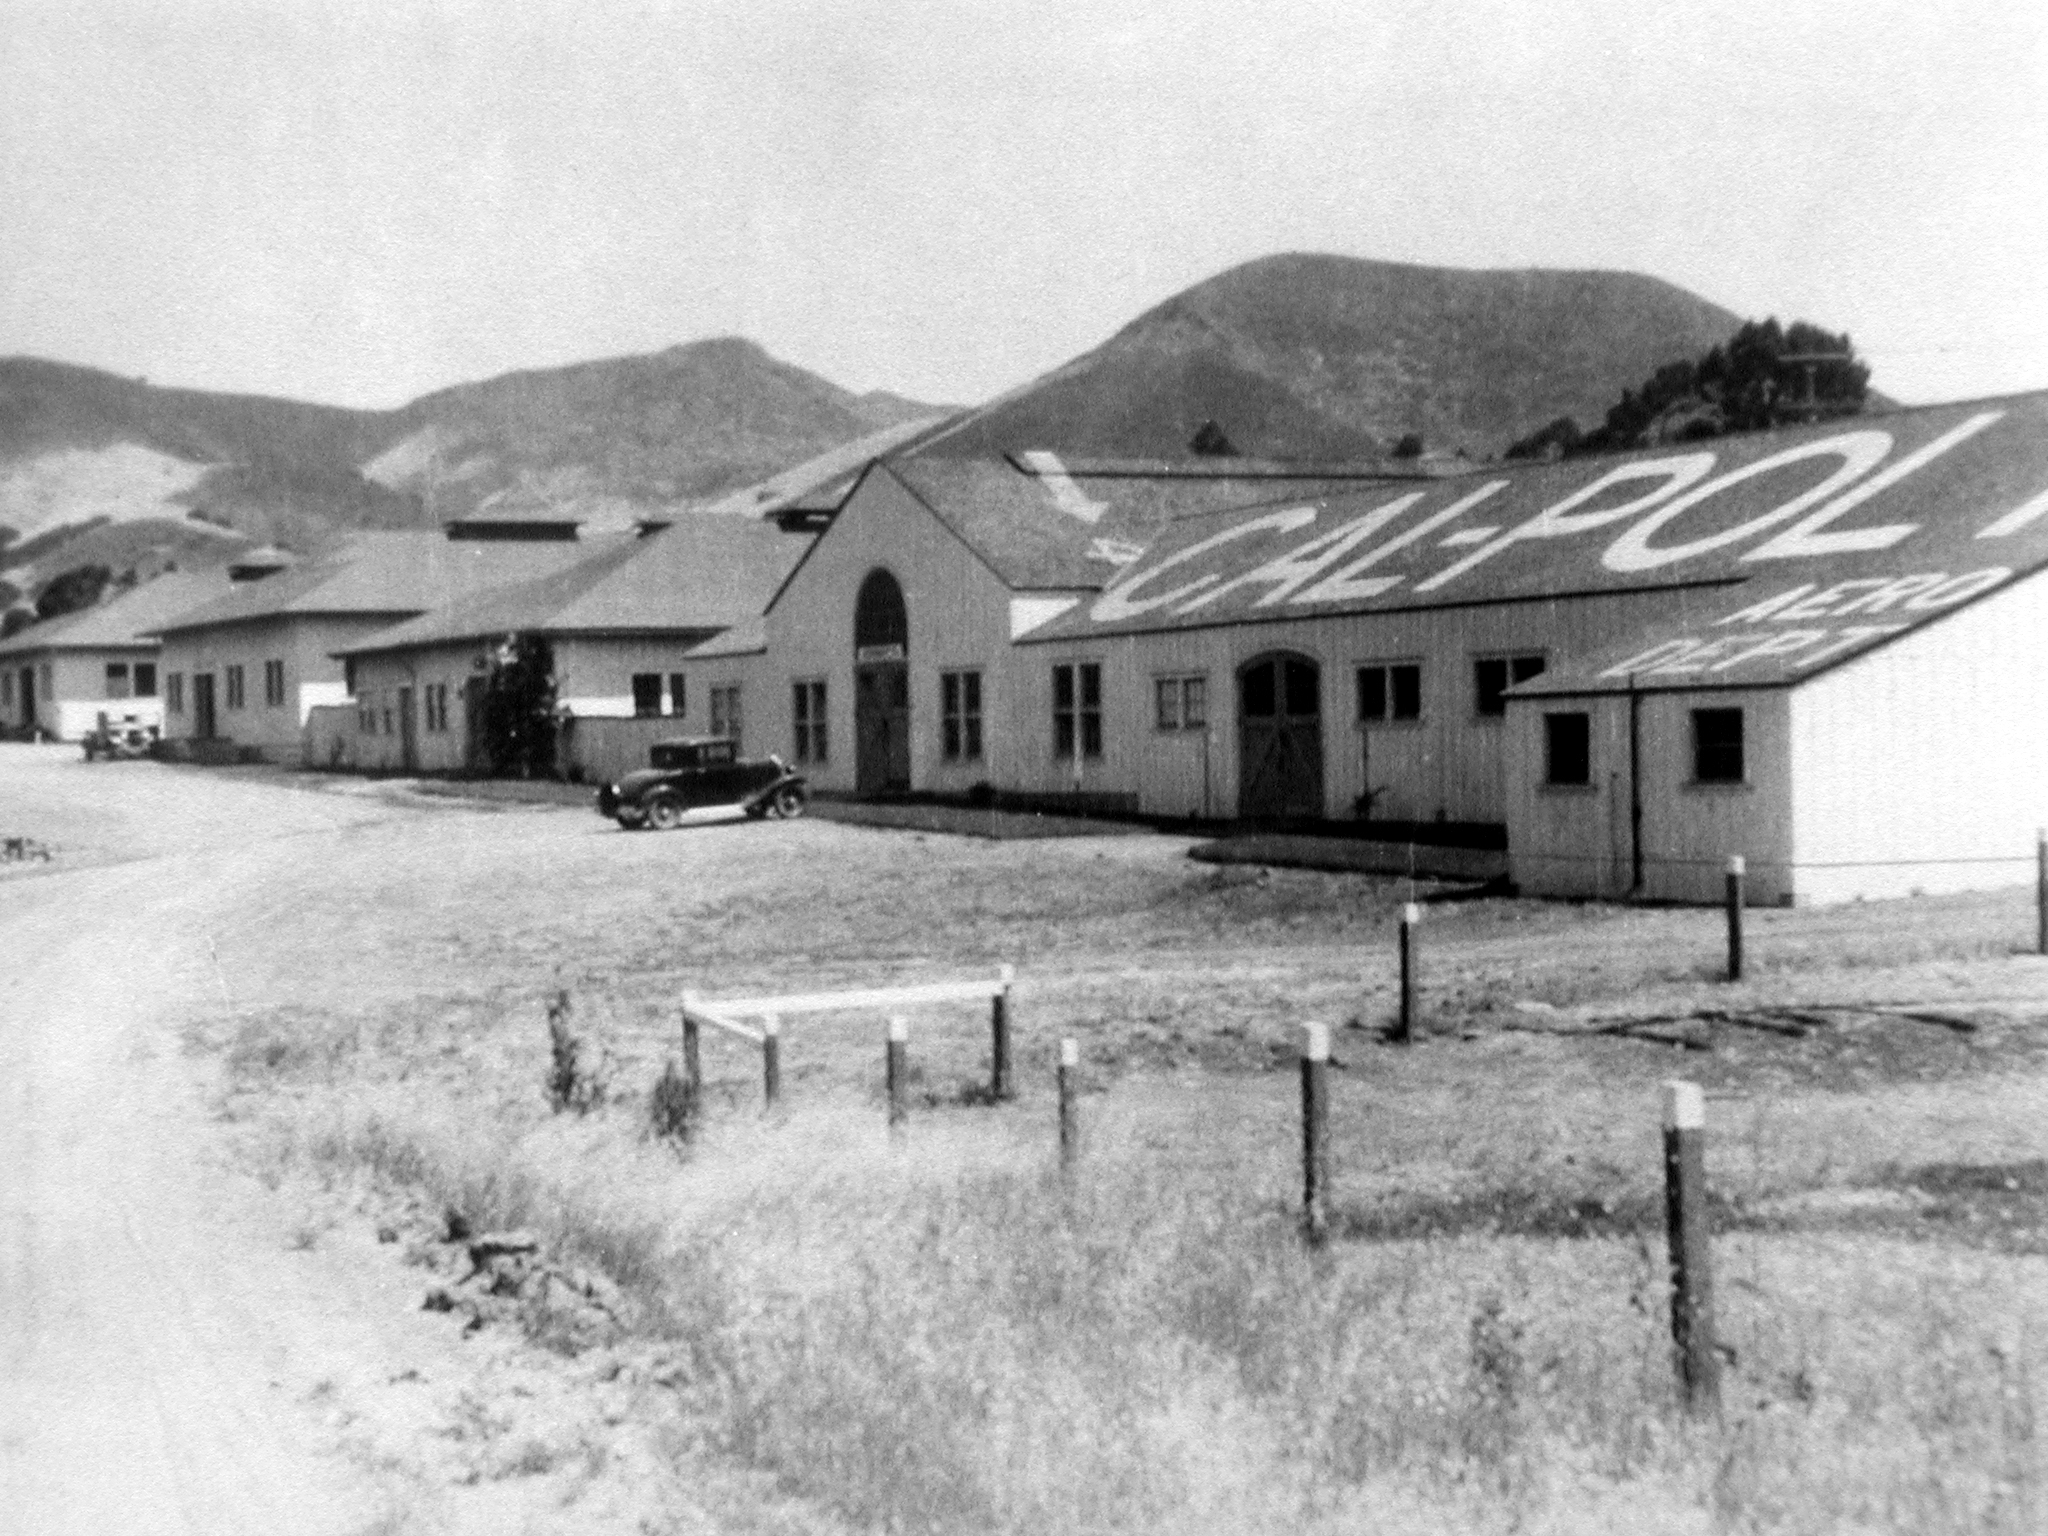 An historical photo of the Hangar shows the early days of the facility designed for the Aeronautical Engineering Department